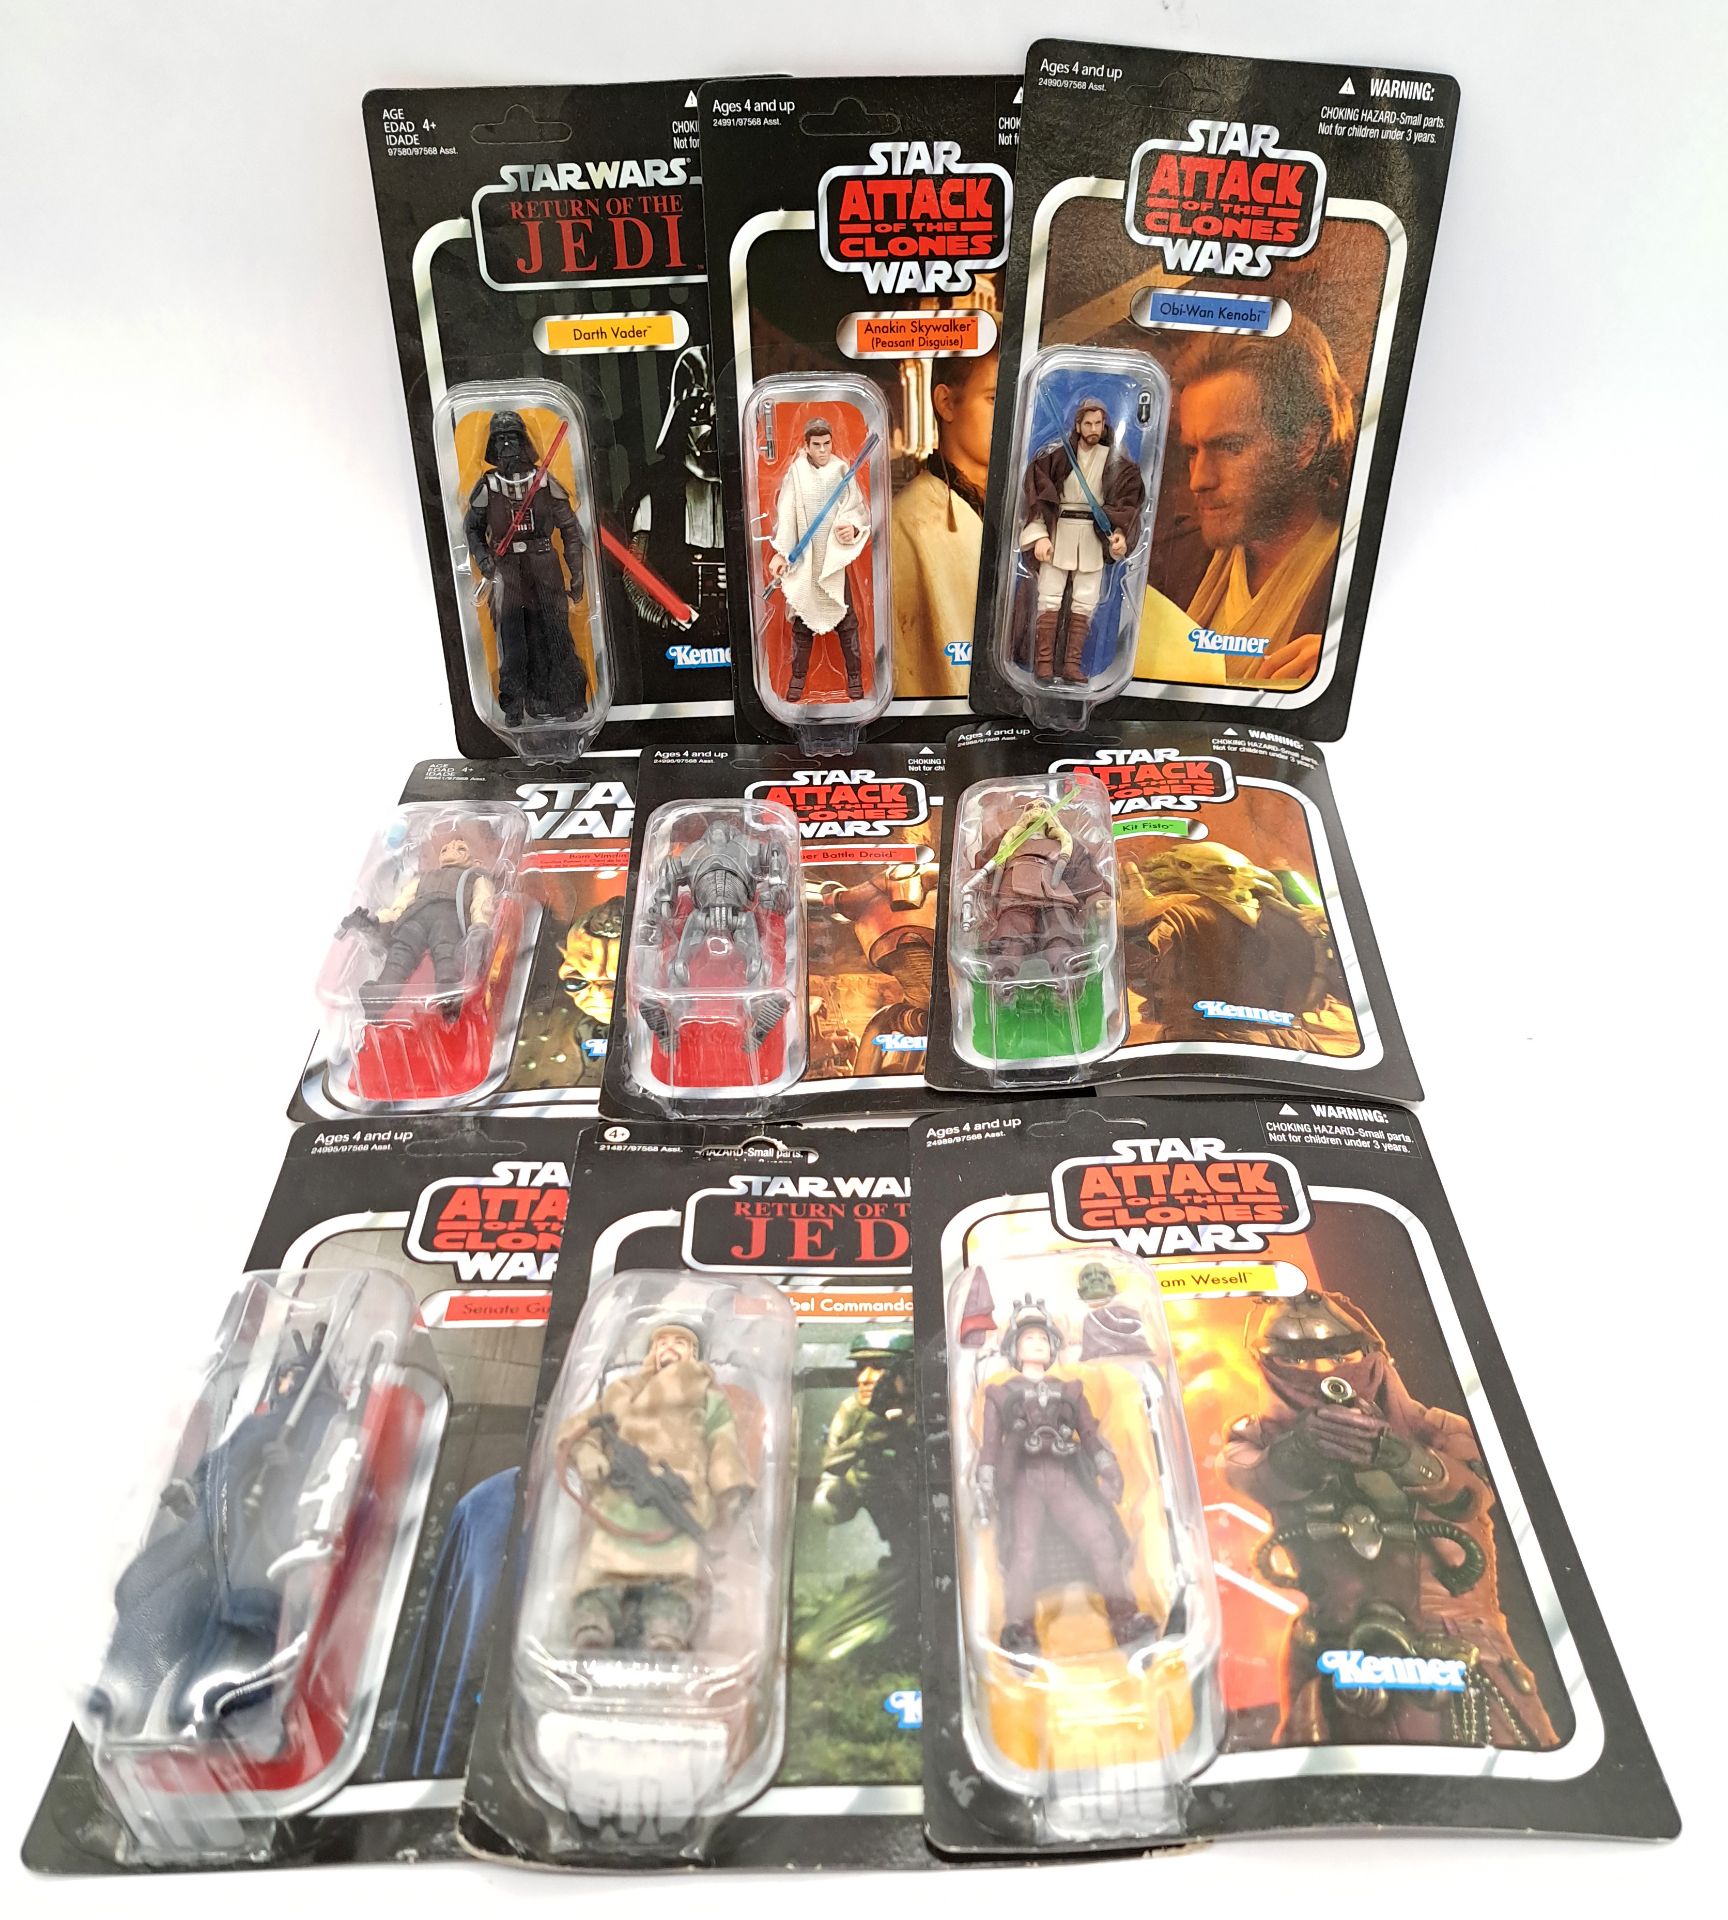 Quantity of Hasbro Star Wars the Vintage Series 3 3/4" Action Figures